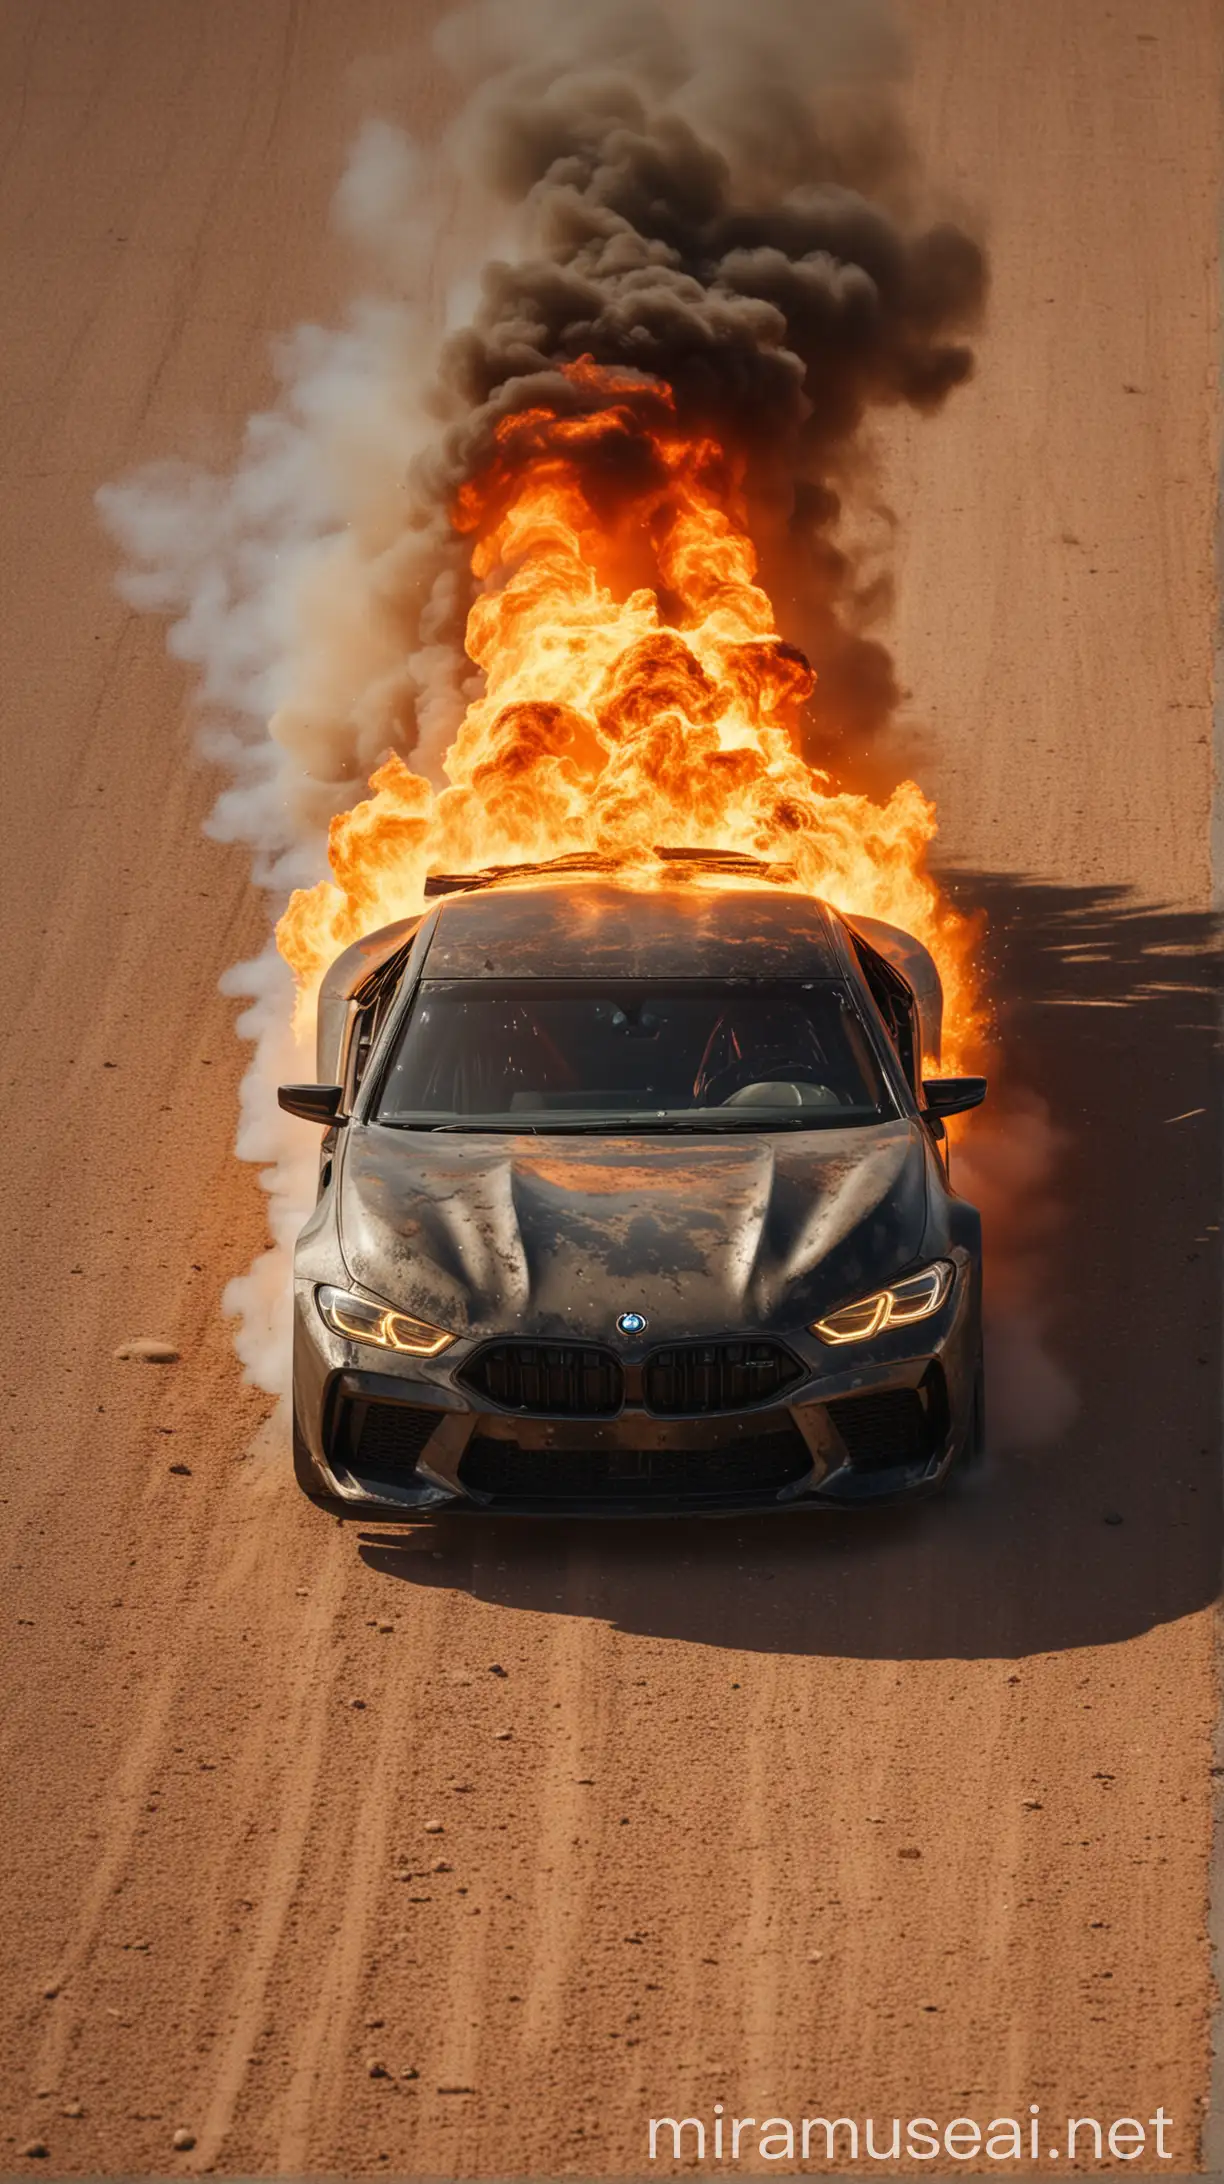 A BMW m 8 car with headlights on drives into the desert and burns, flames soaring into the sky